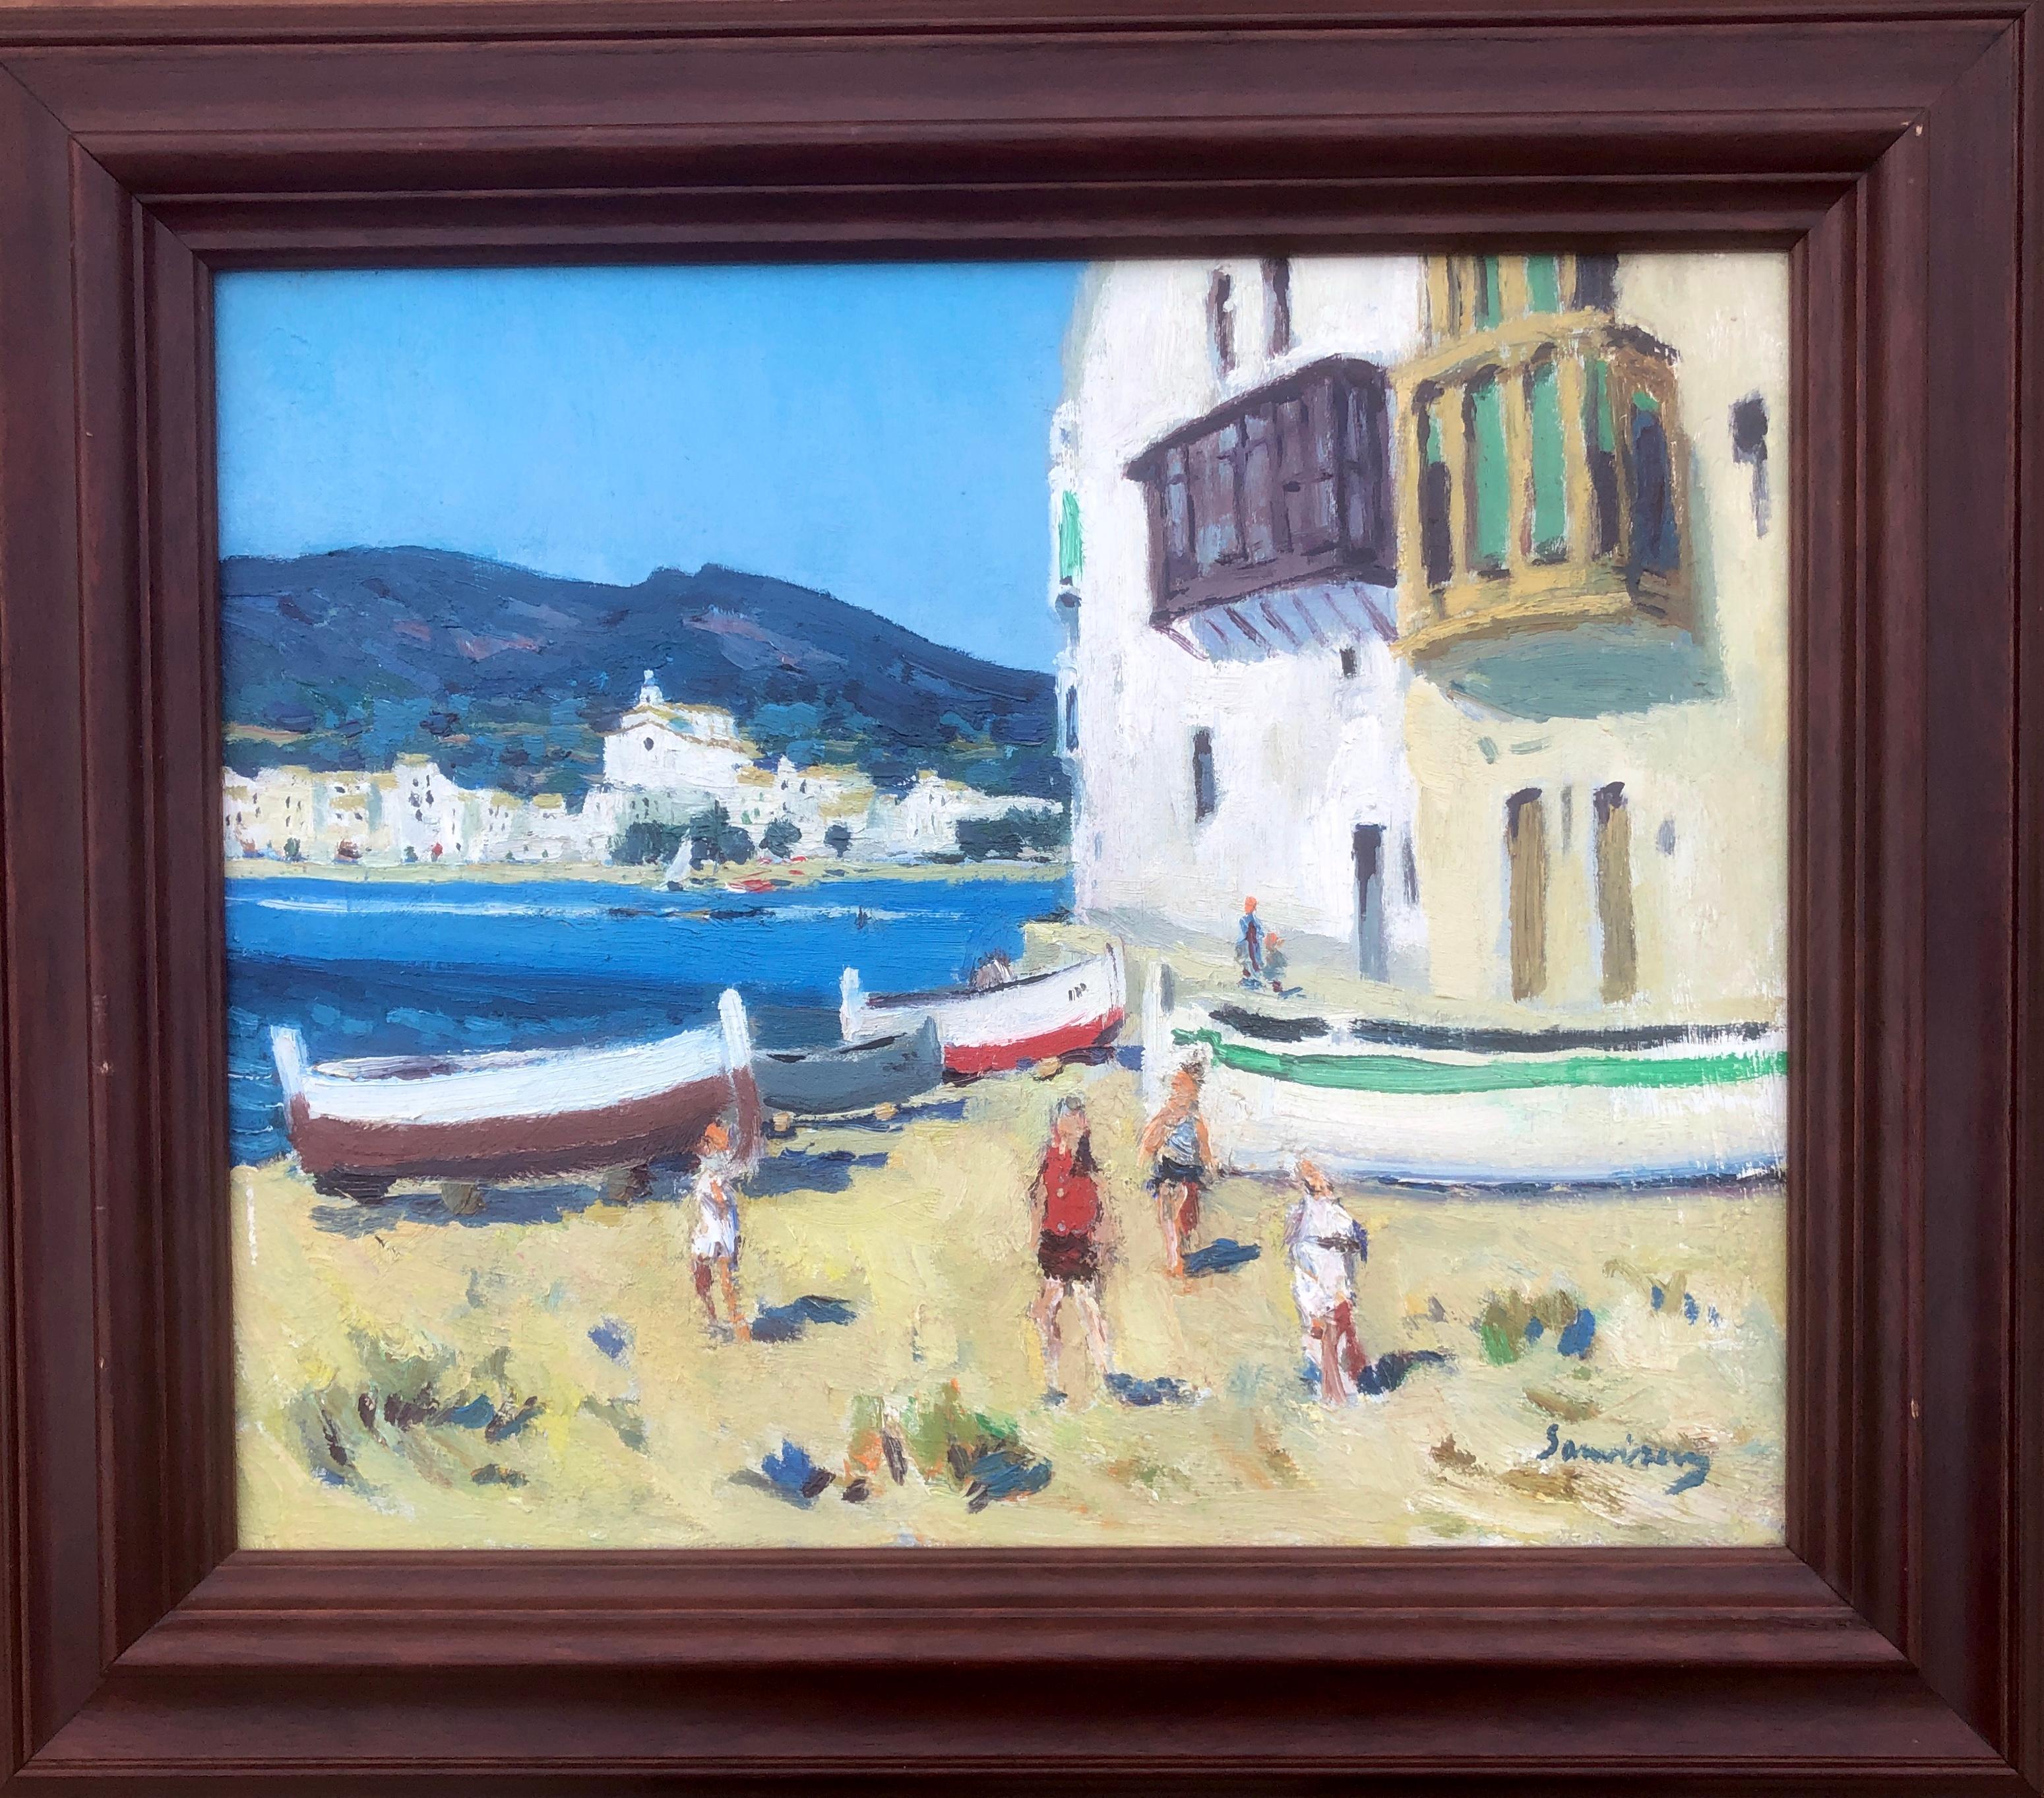 Cadaques Spain oil on canvas painting spanish mediterranean seascape - Painting by Ramon Sanvisens Marfull